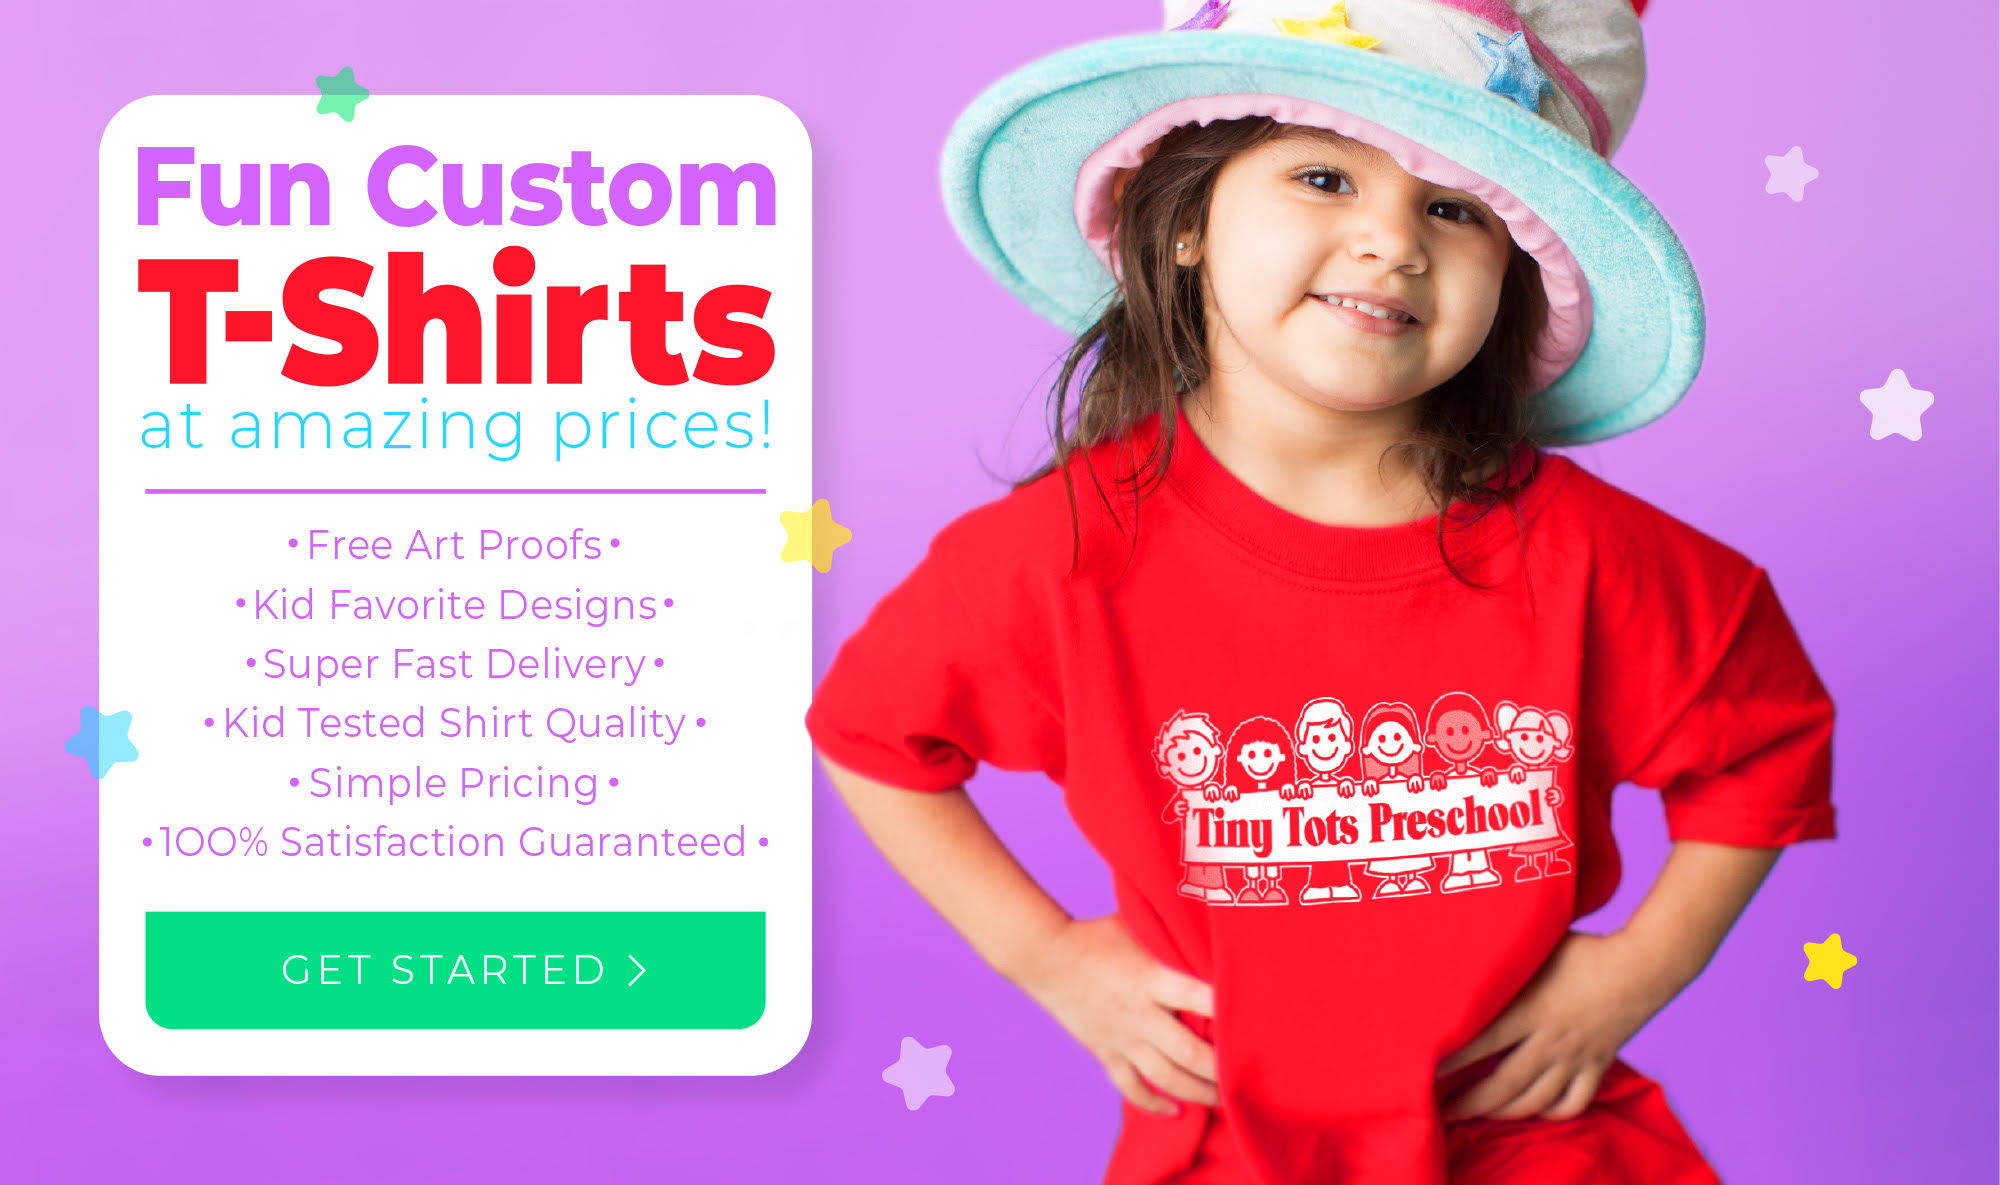 Kids love our t-shirts!